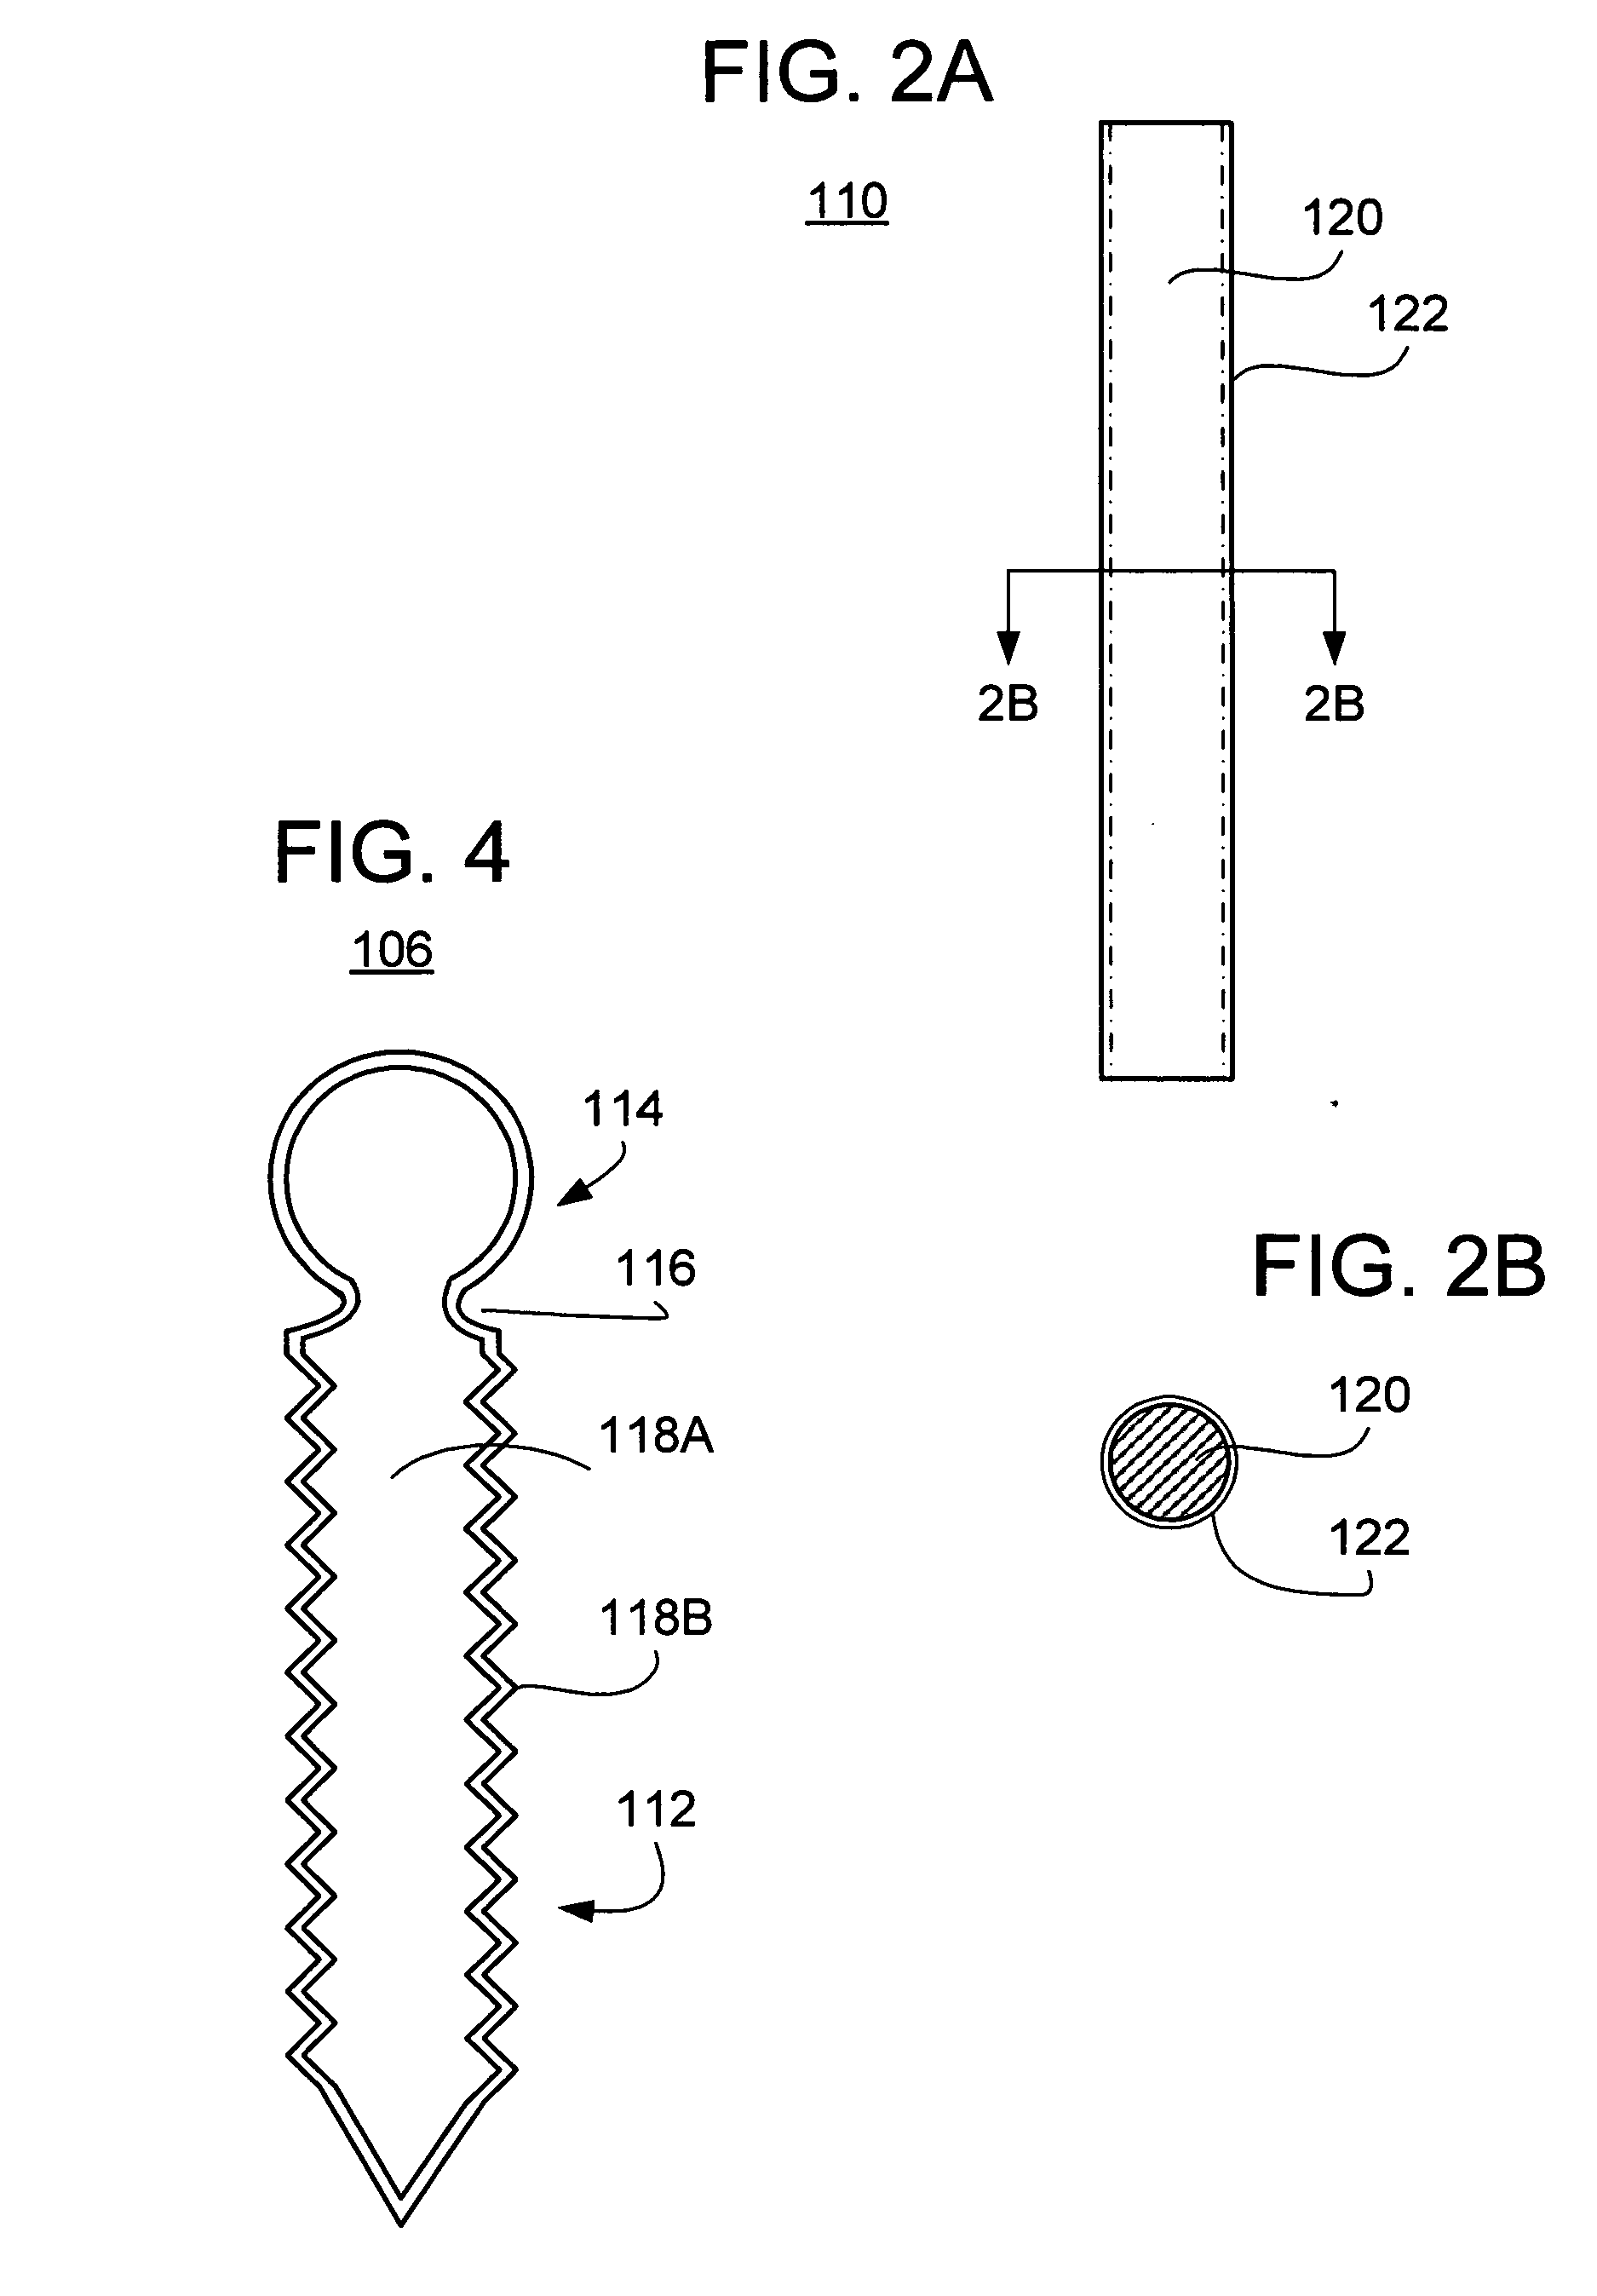 Pedicle screw, cervical screw and rod